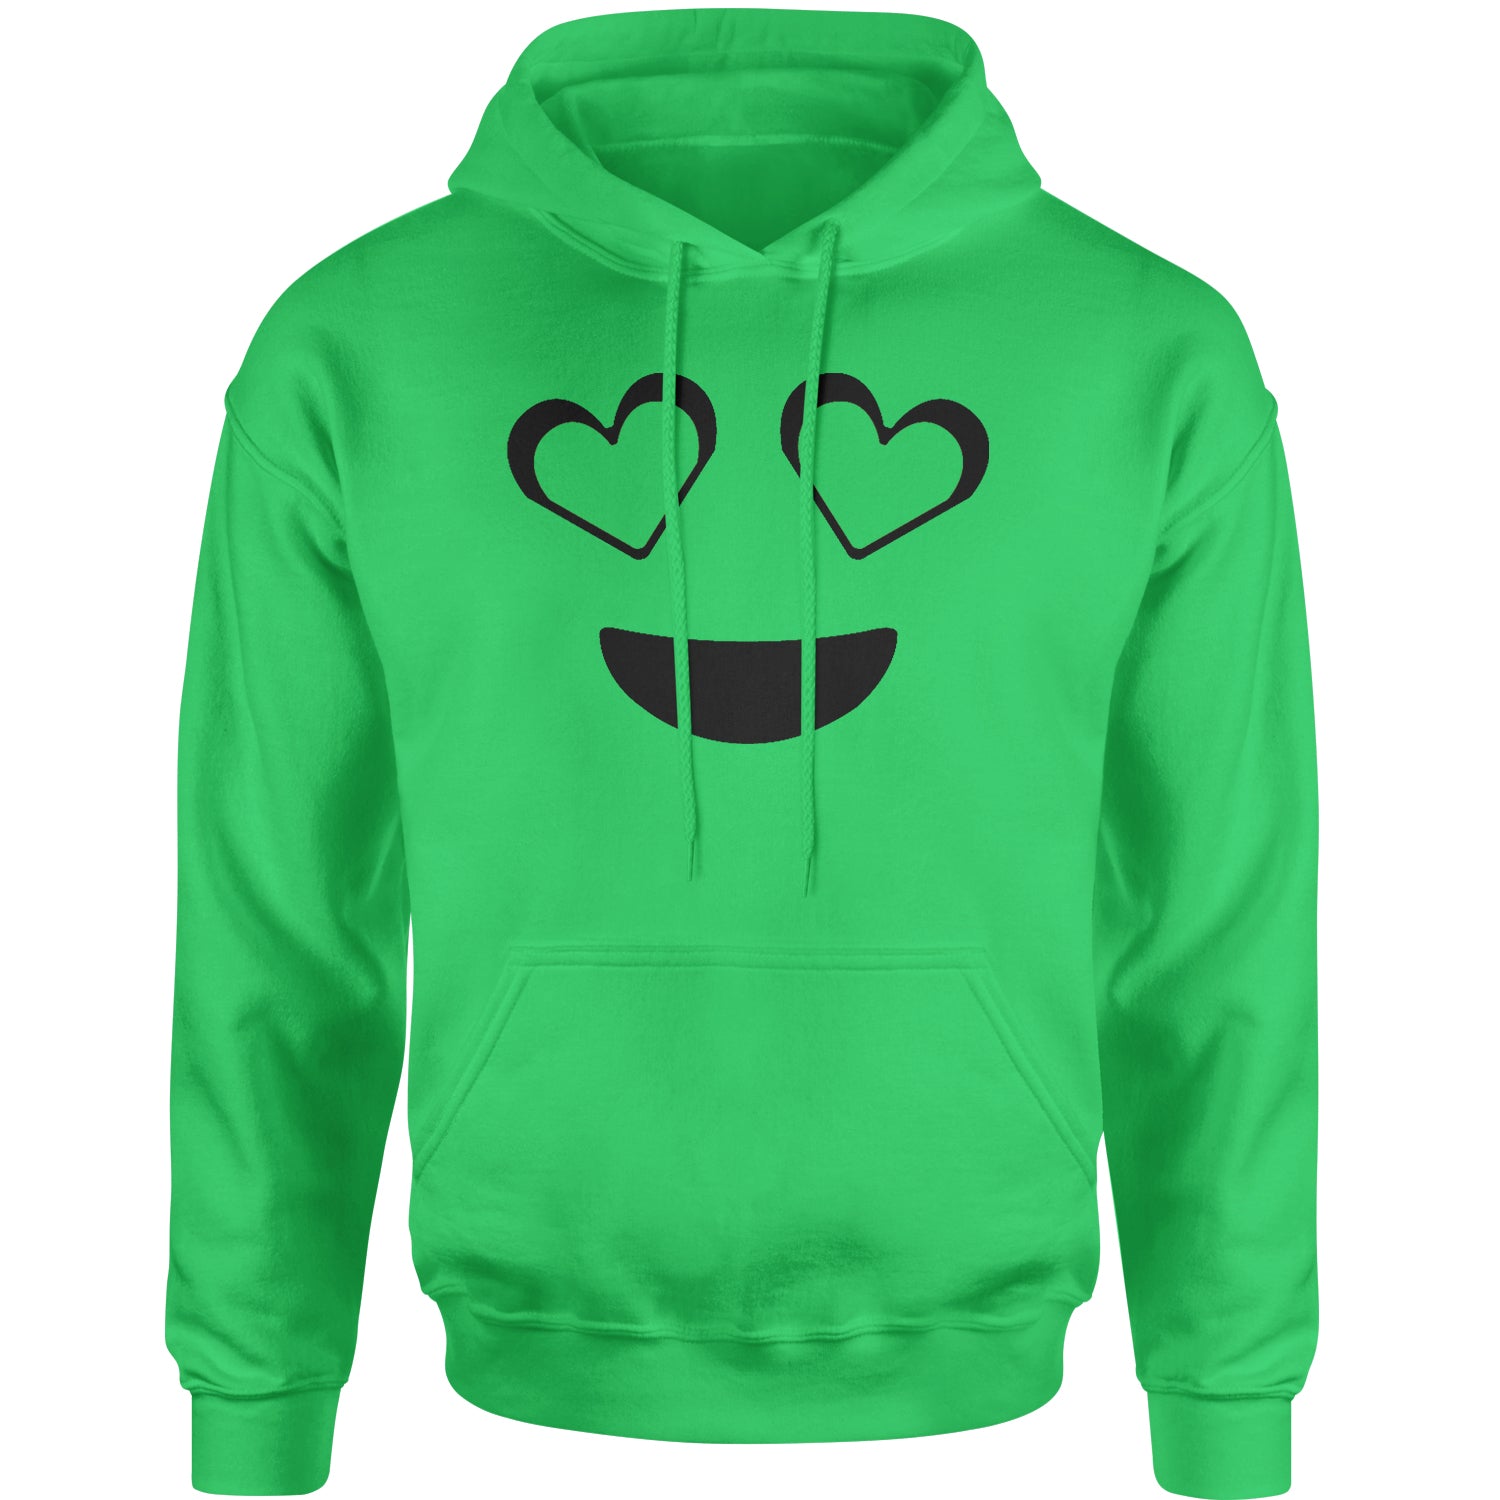 Emoticon Heart Eyes Smile Face Adult Hoodie Sweatshirt cosplay, costume, dress, emoji, emote, face, halloween, Smile, up, yellow by Expression Tees